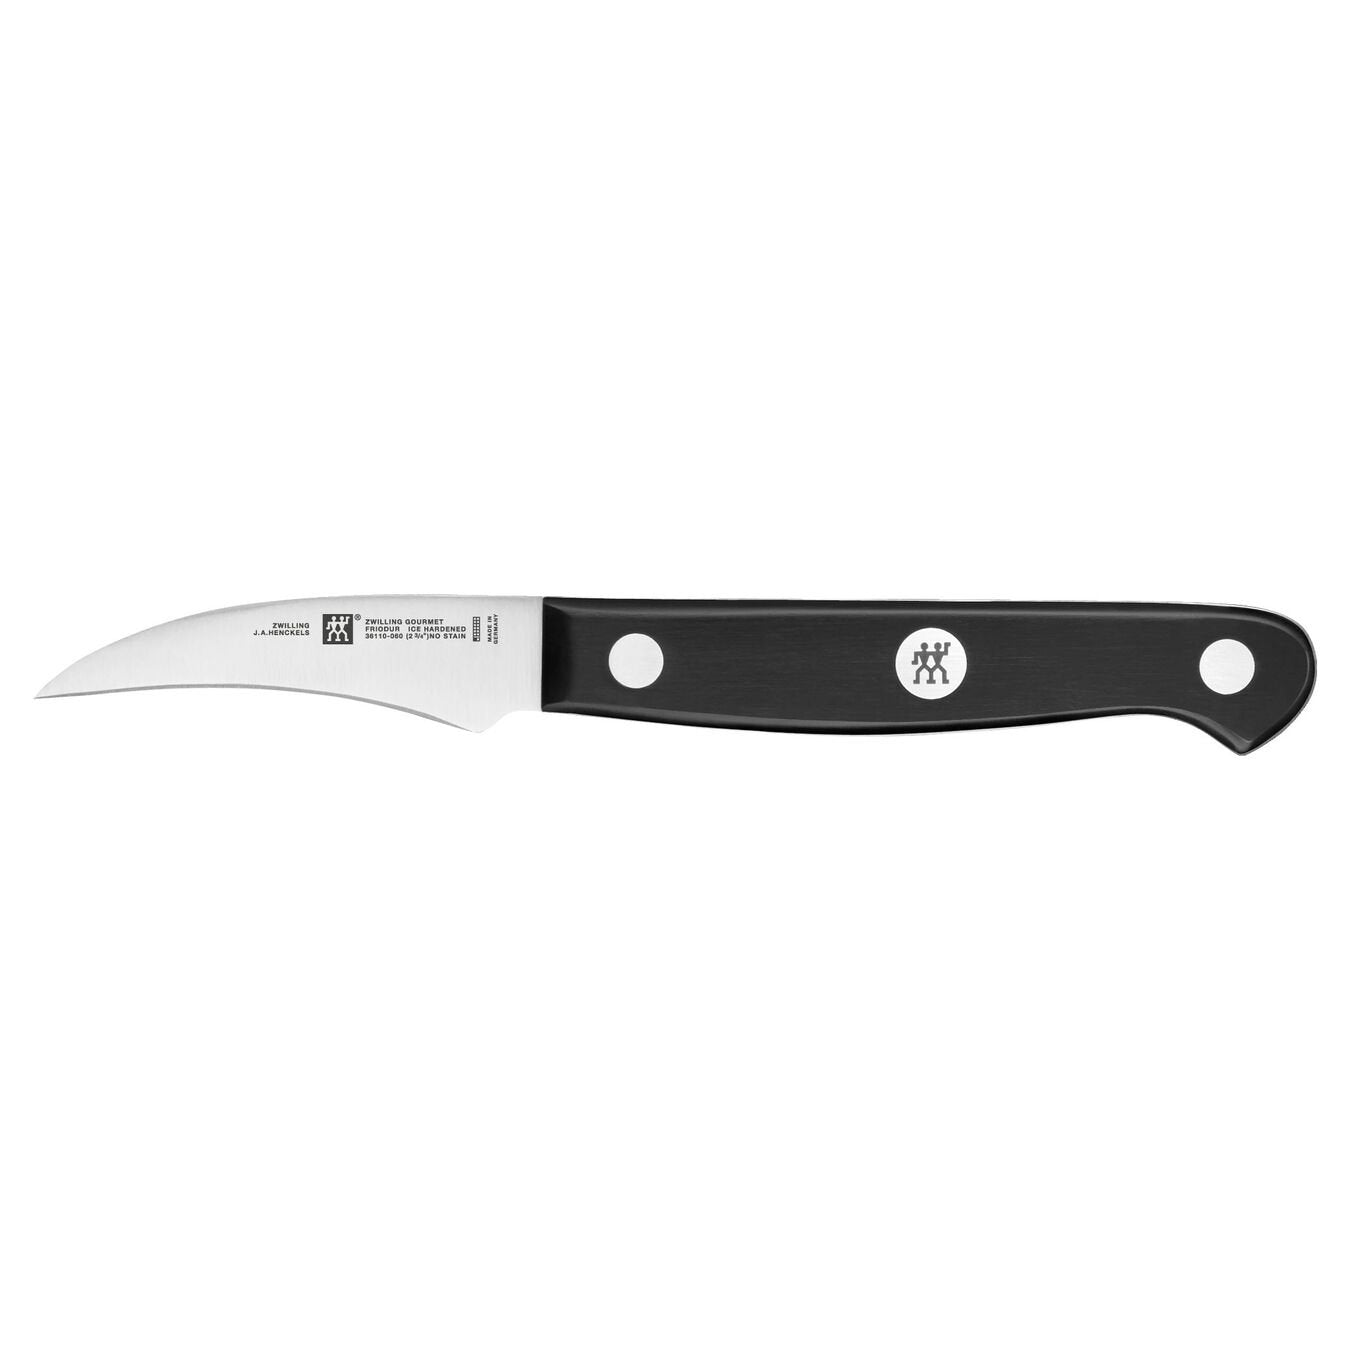 curved blade knife with riveted black handle on white background